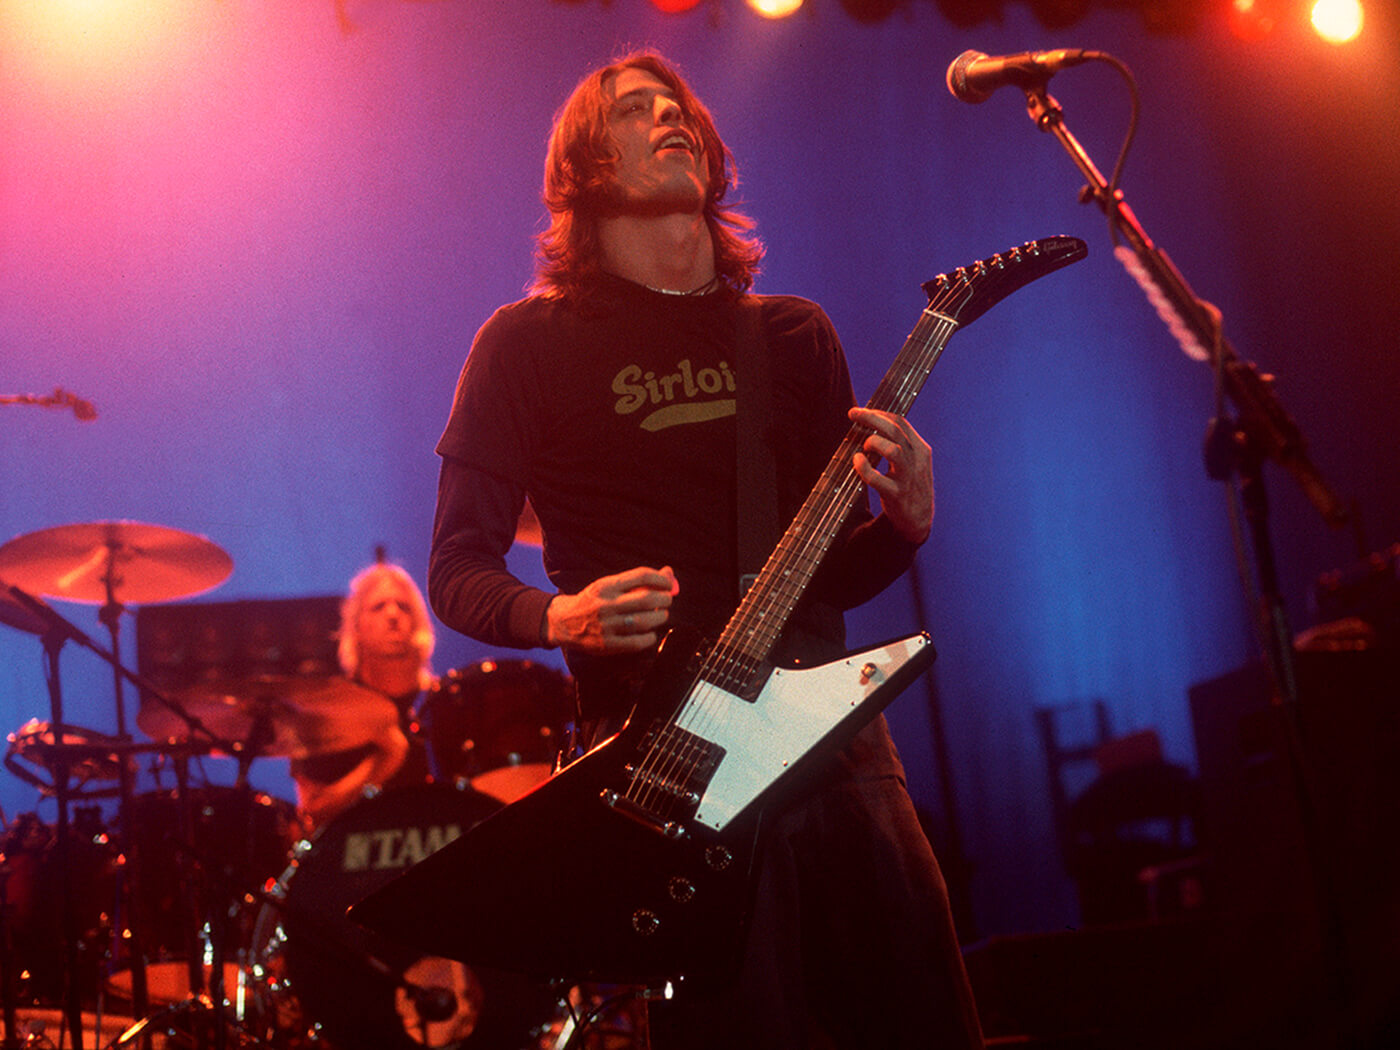 Dave Grohl performing with the Foo Fighers in 2001. He plays his black Gibson Explorer, photo by Paul Natkin/Getty Images